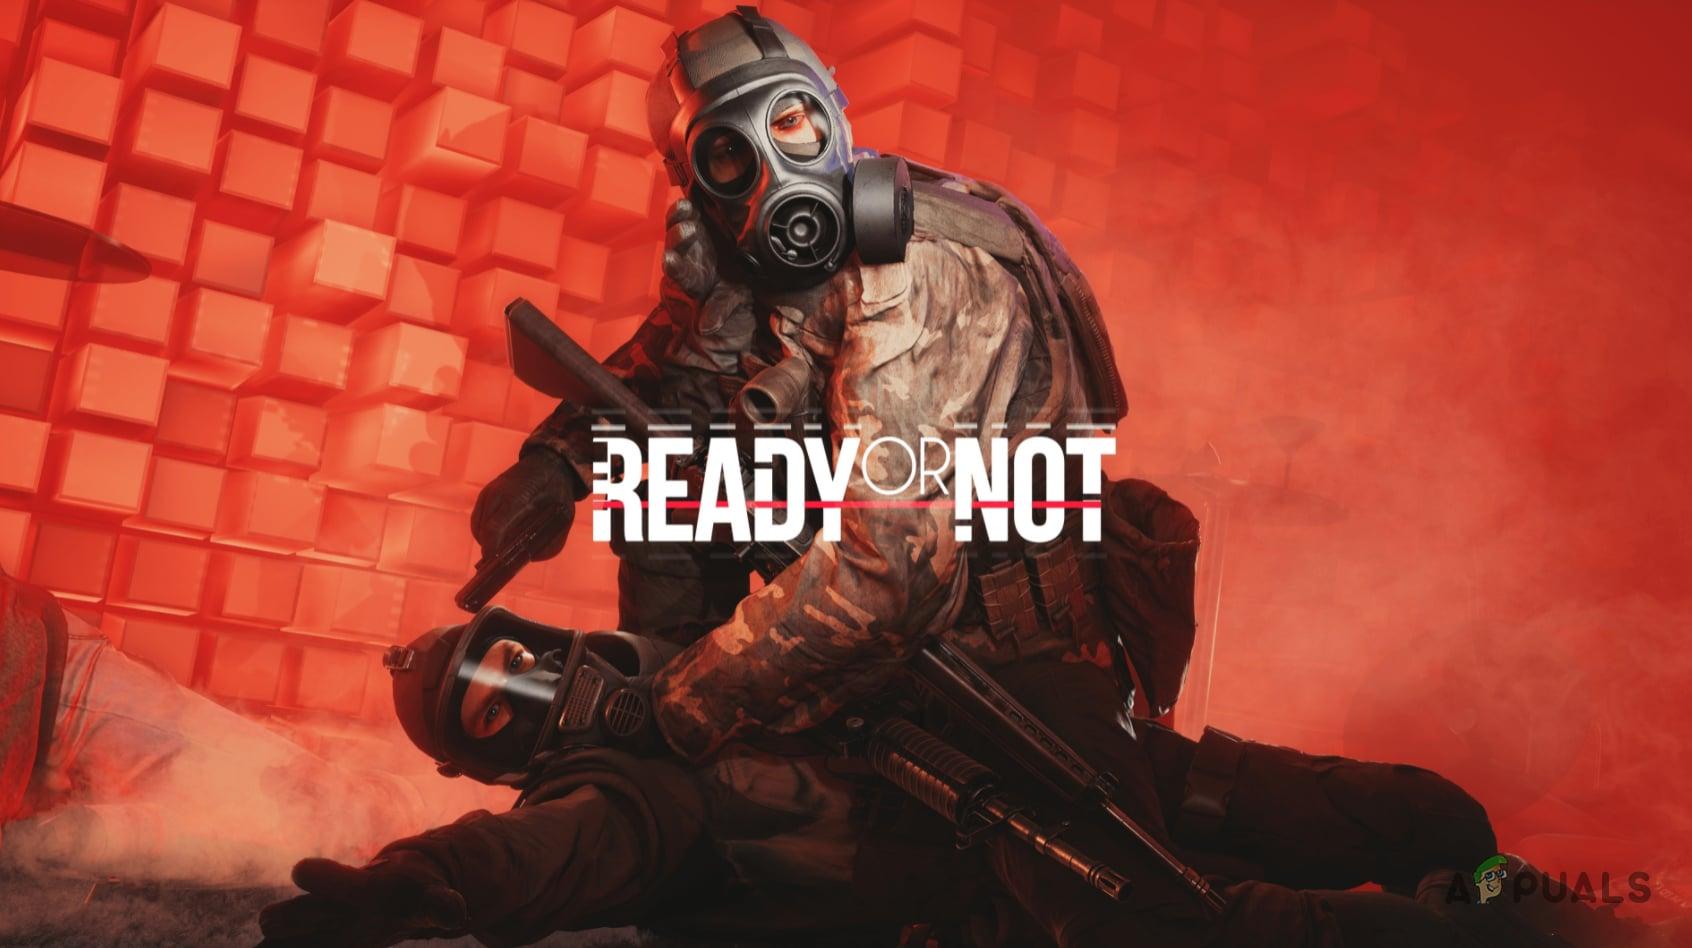 Ready Or Not' is a well-made tactical FPS that I feel uncomfortable playing